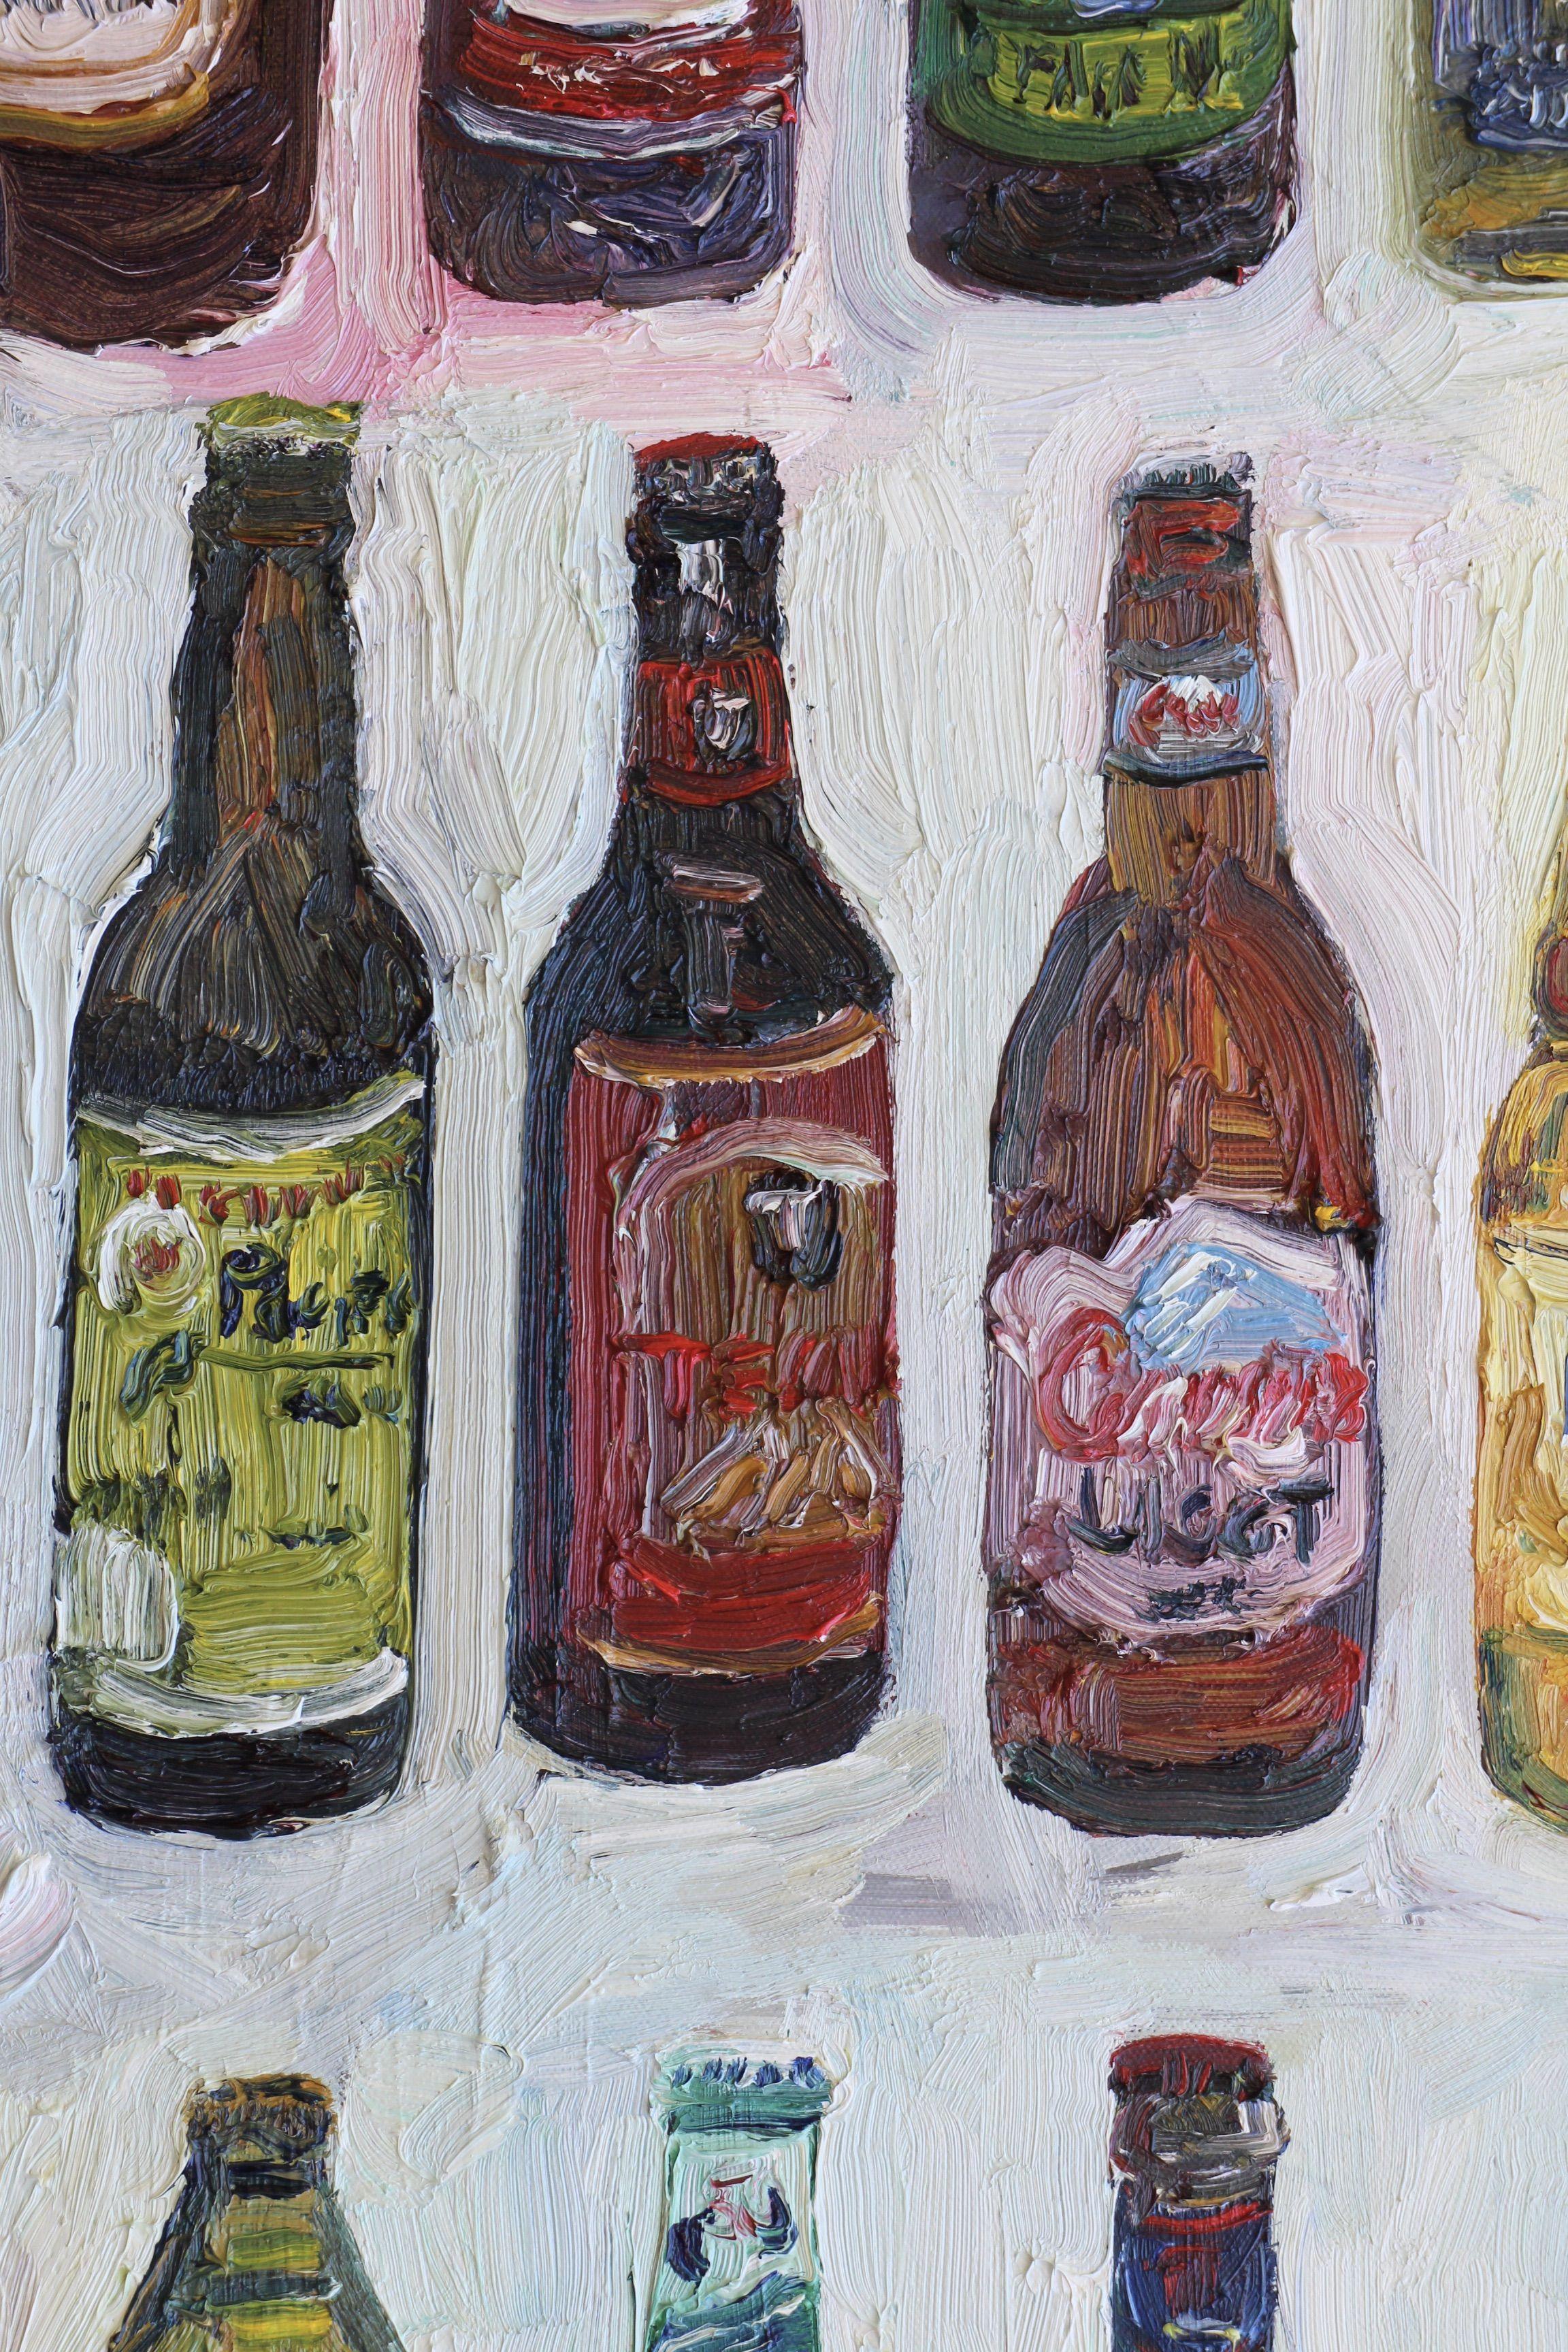 99 bottles of beer on the wall, 99 bottles of beer you take one down, pass it around 98 bottles of beer on the wall 98 bottles of beer on the wall, etc, etc, etc.   :: Painting :: Contemporary :: This piece comes with an official certificate of